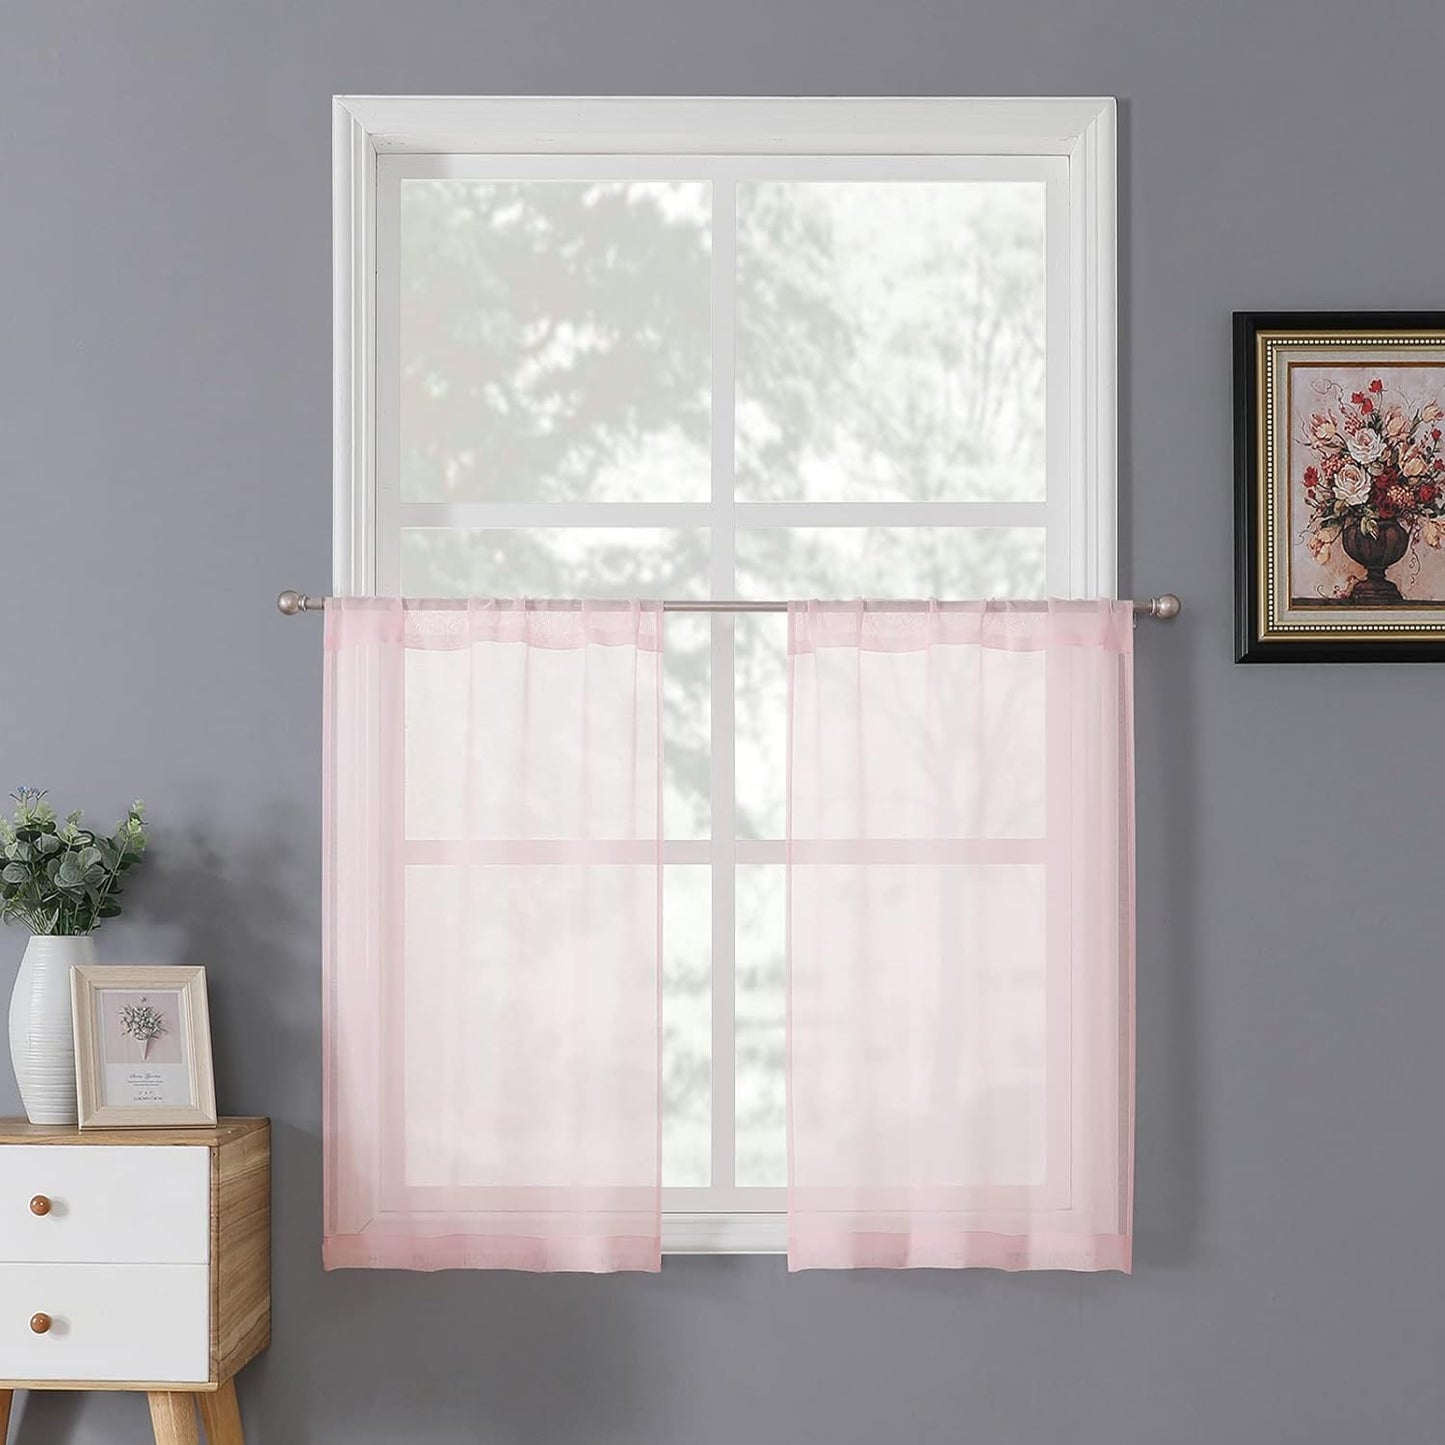 Tollpiz Short Sheer Curtains Linen Textured Bedroom Curtain Sheers Light Filtering Rod Pocket Voile Curtains for Living Room, 54 X 45 Inches Long, White, Set of 2 Panels  Tollpiz Tex Pink 25"W X 24"L 